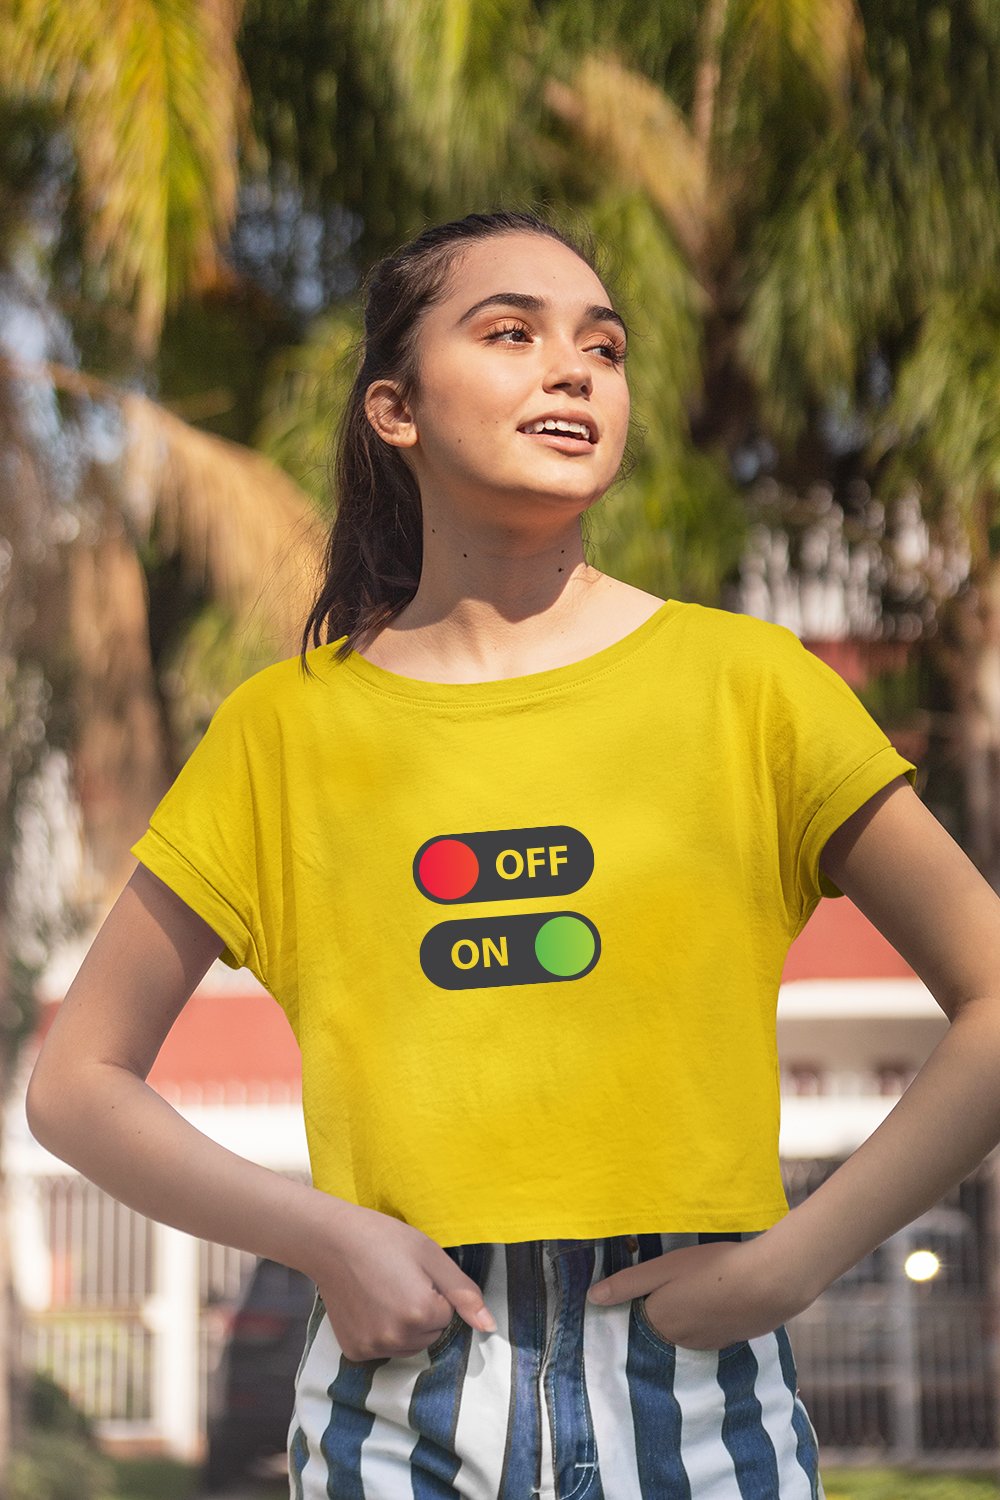 Off On Graphic Printed Yellow Crop Top